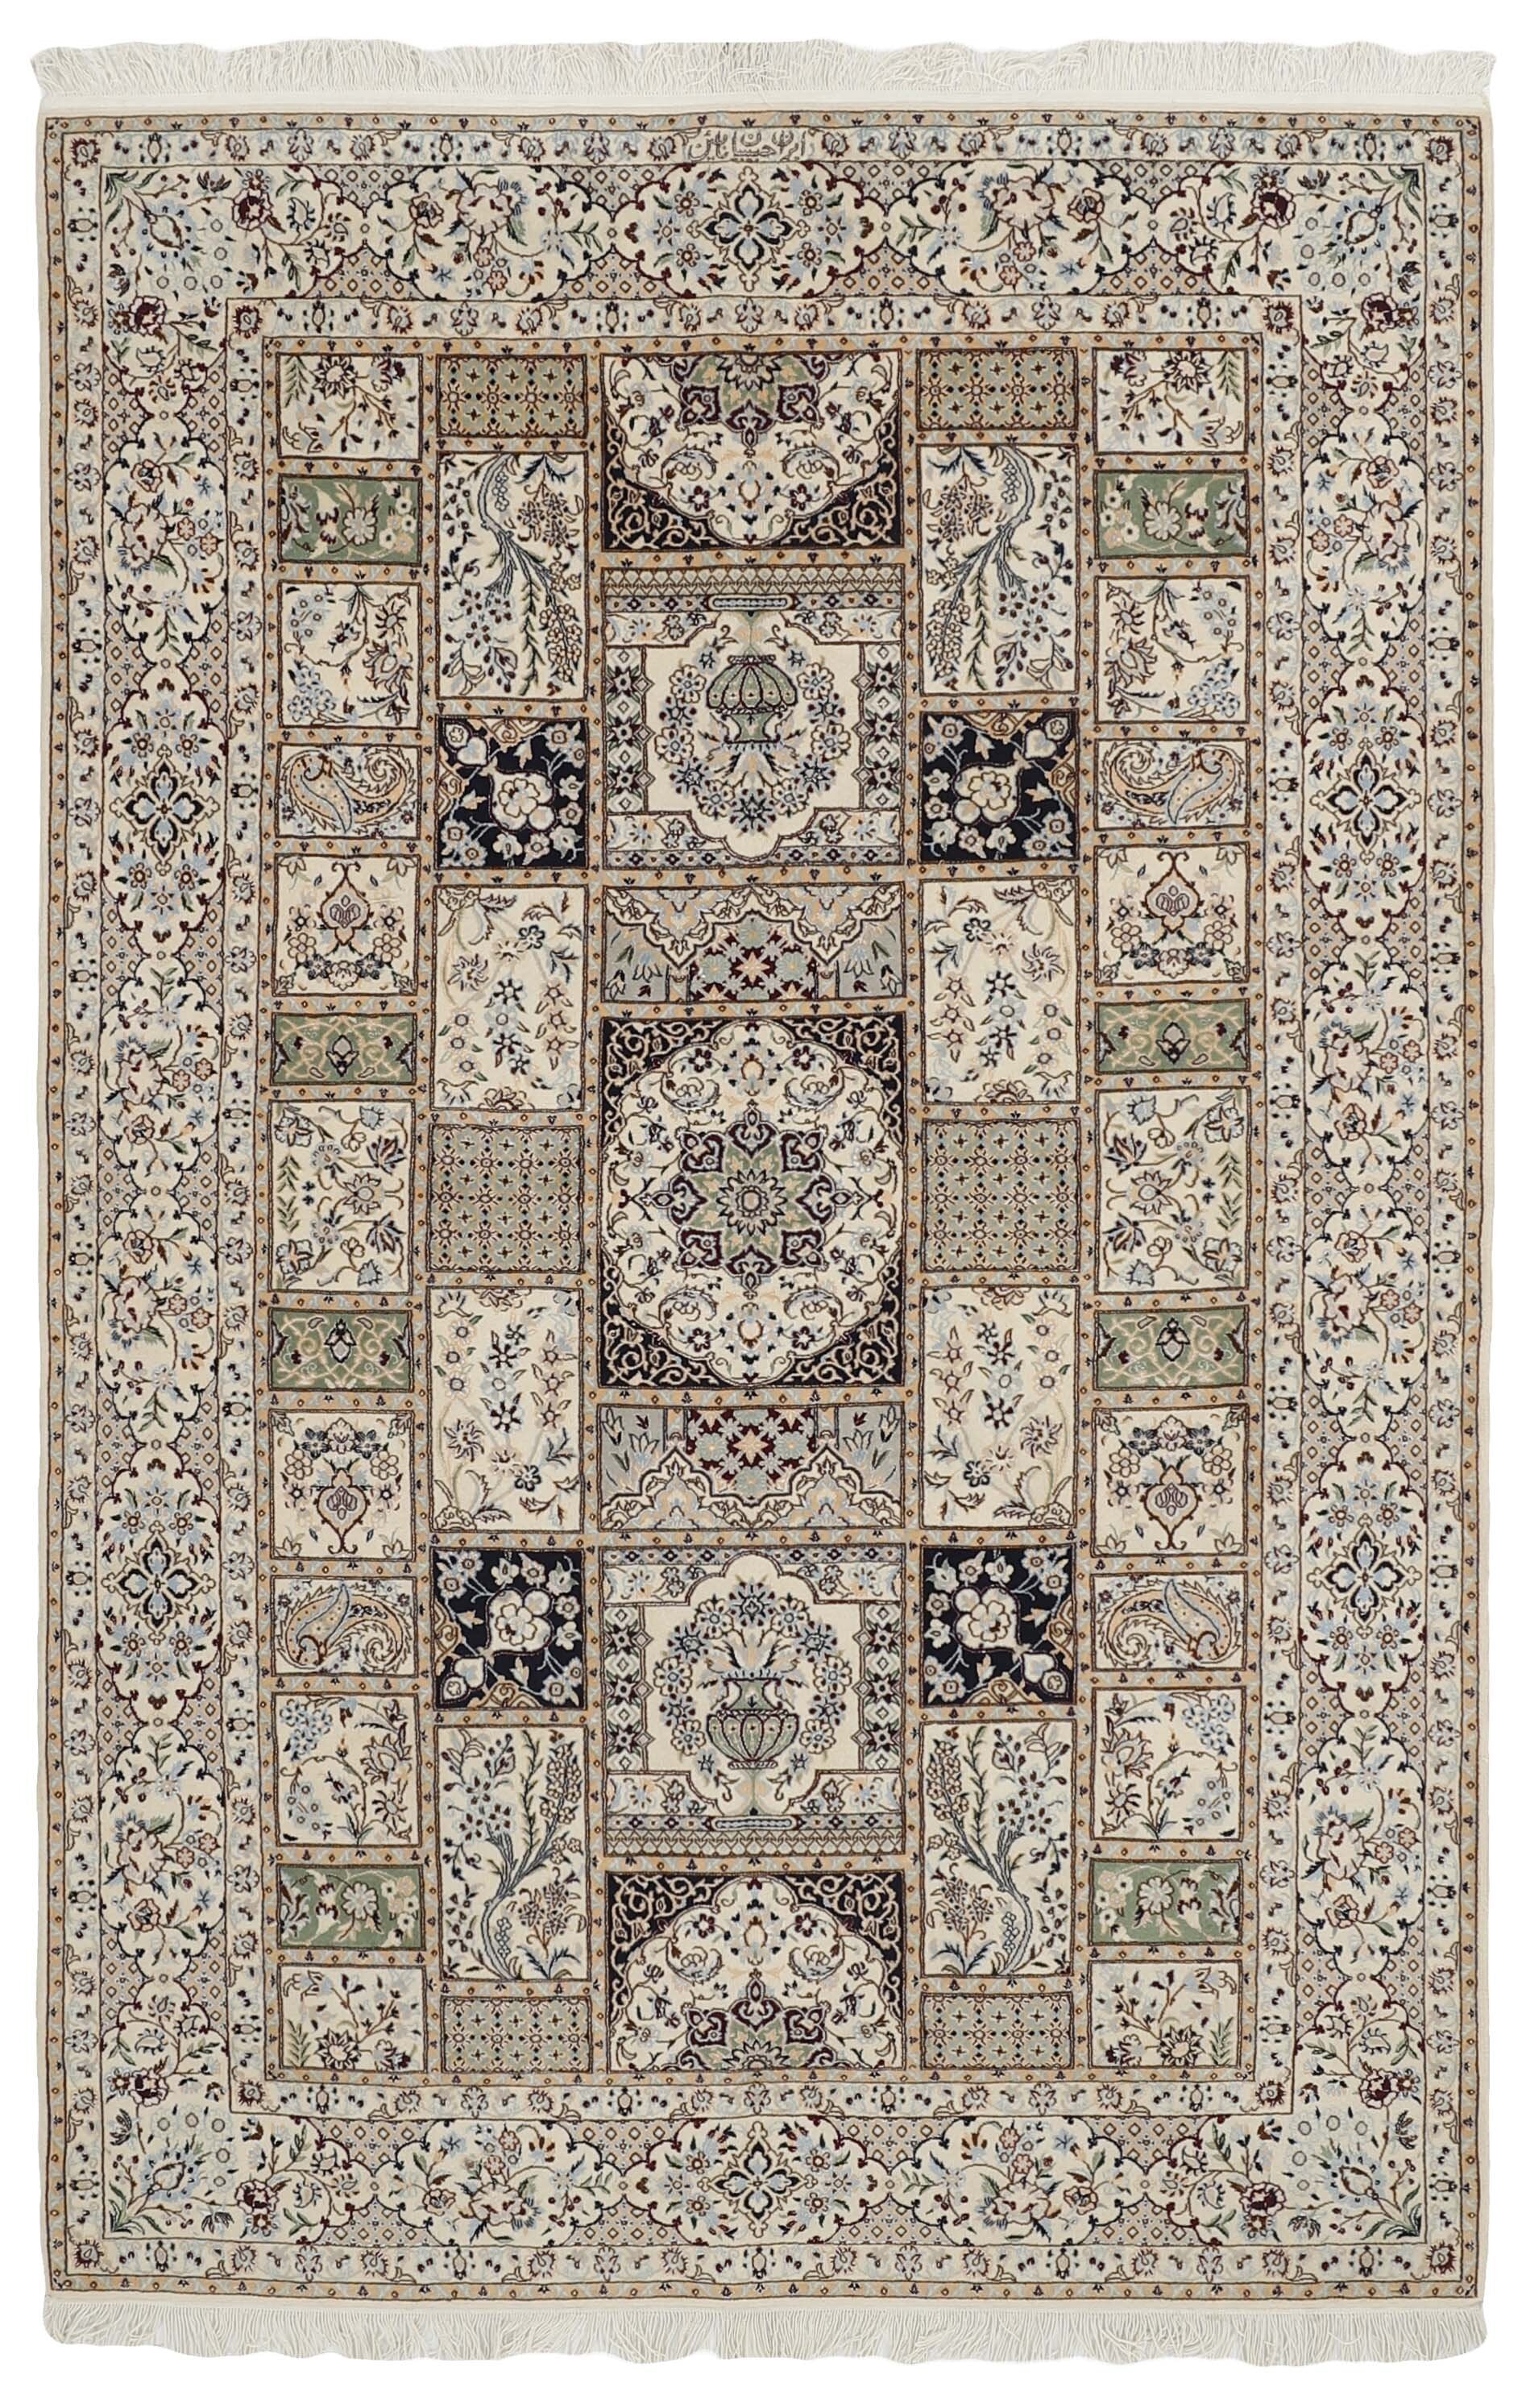 Authentic oriental rug with traditional floral design in cream, red, blue and beige